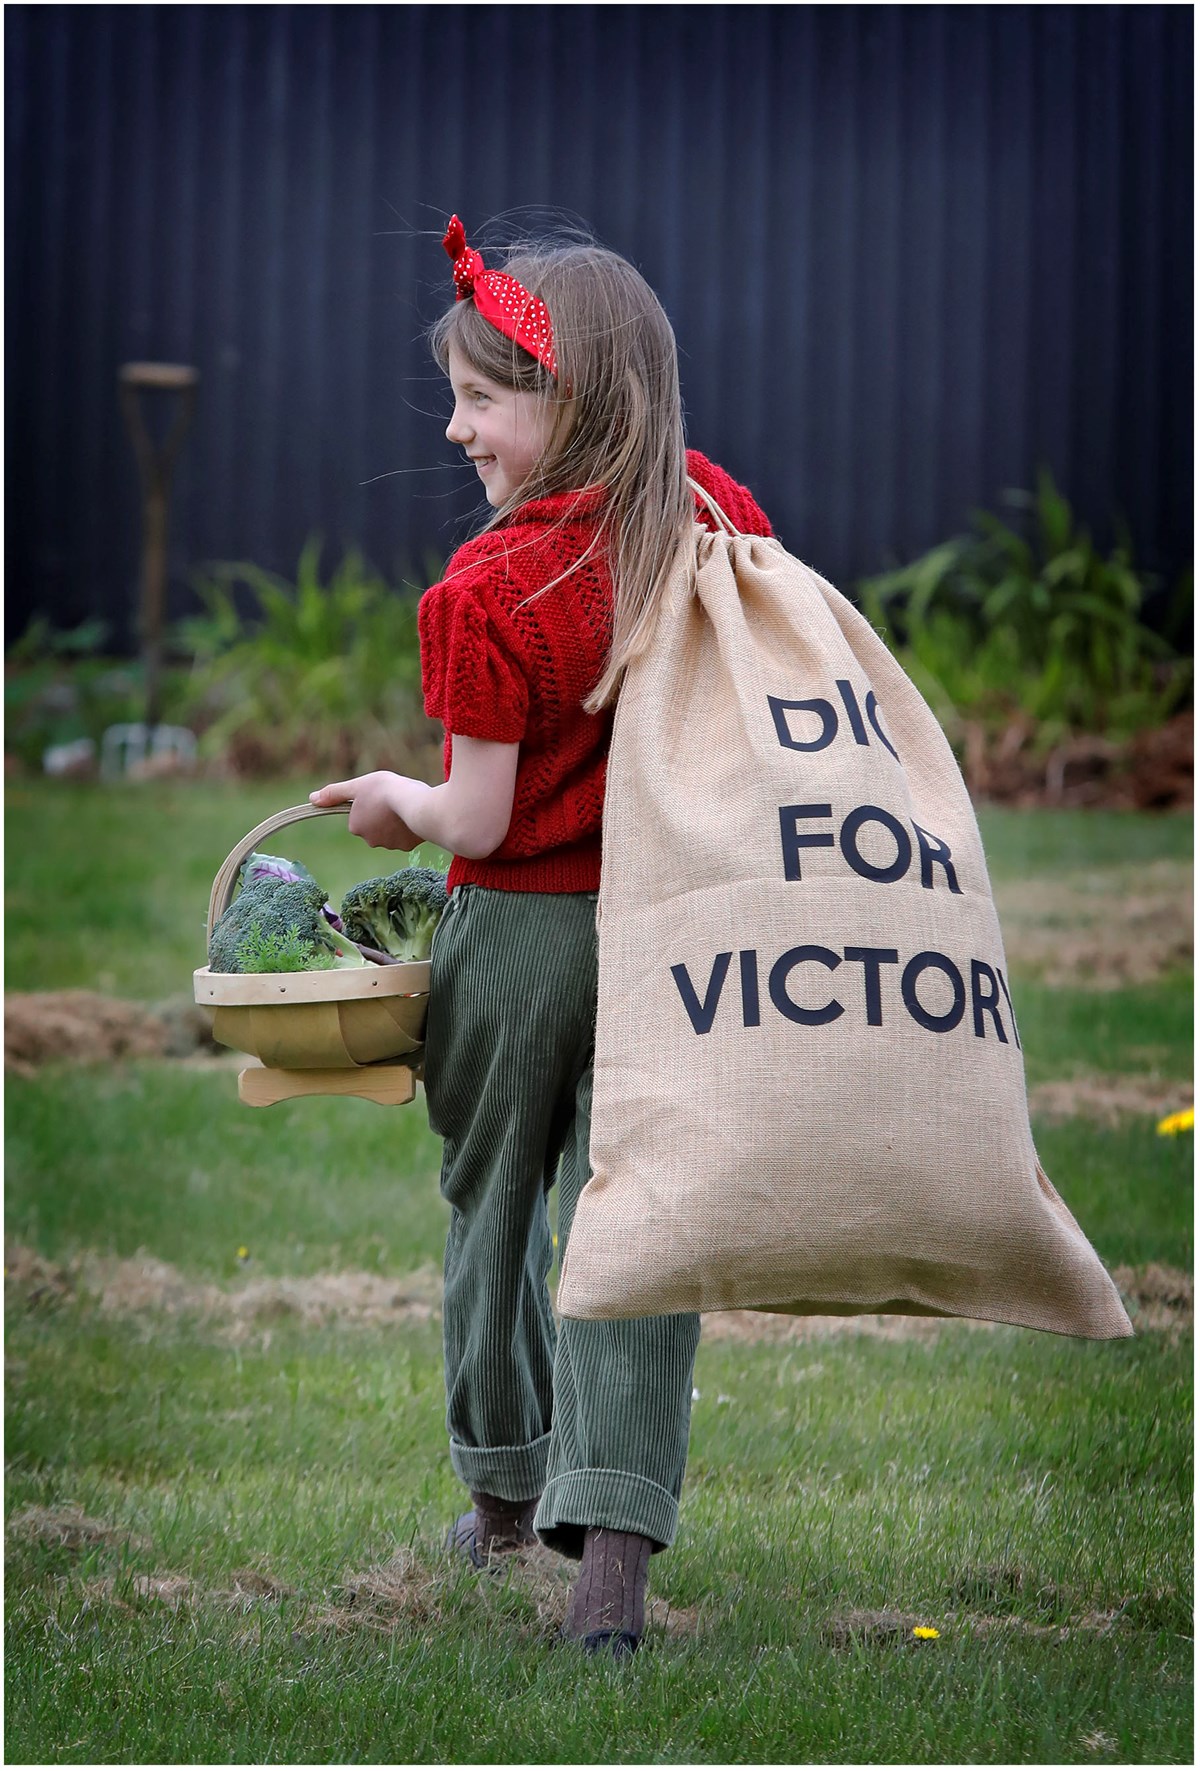 Dig for Victory at the National Museum of Flight, East Lothian. Photo © Paul Dodds (5)